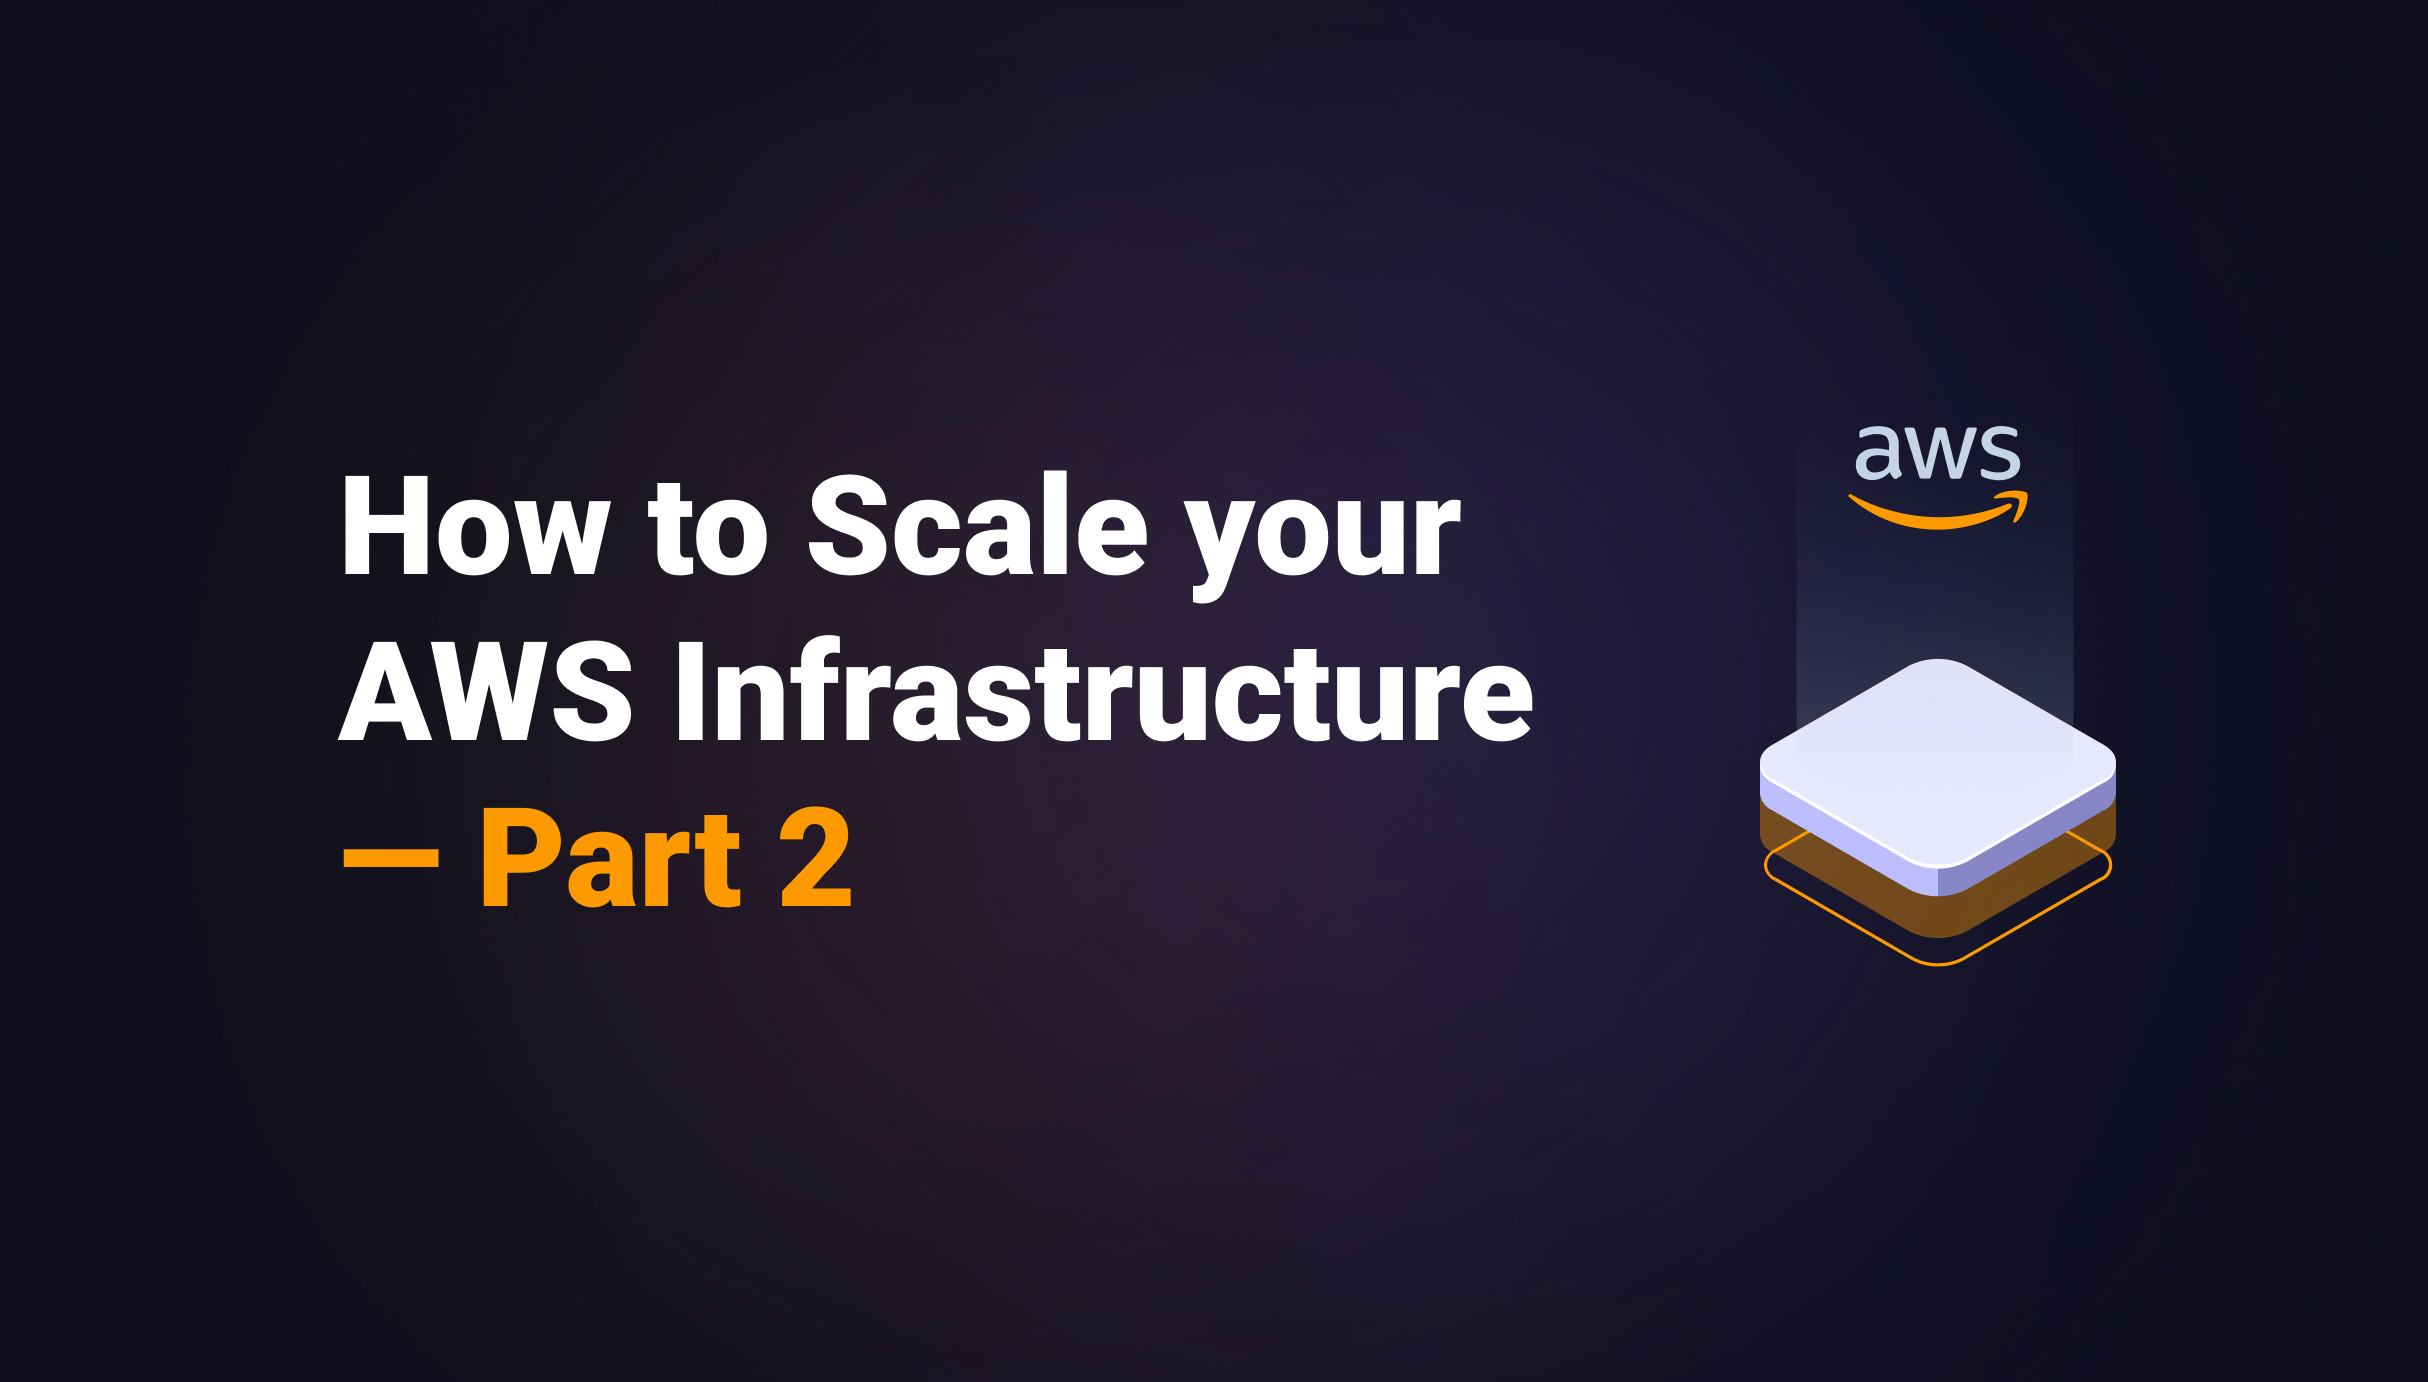 How to Scale your AWS Infrastructure - Part 2